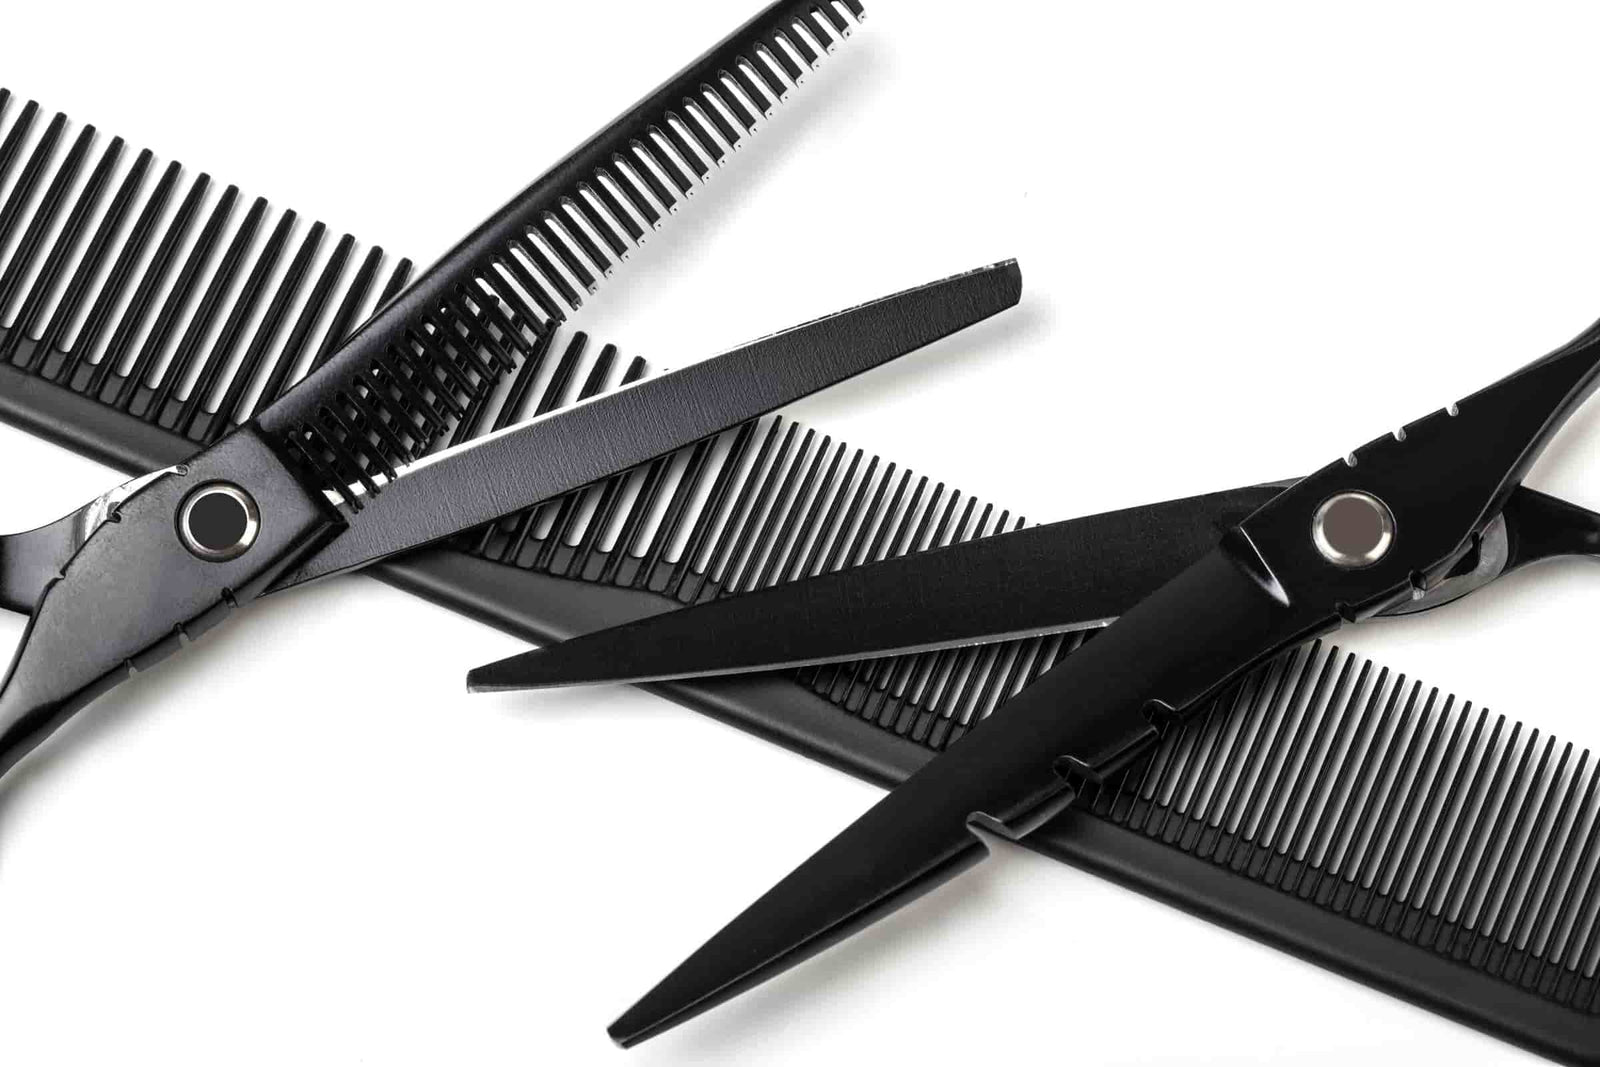 How To Choose Hairdressing Scissors For Clients With Curly Hair